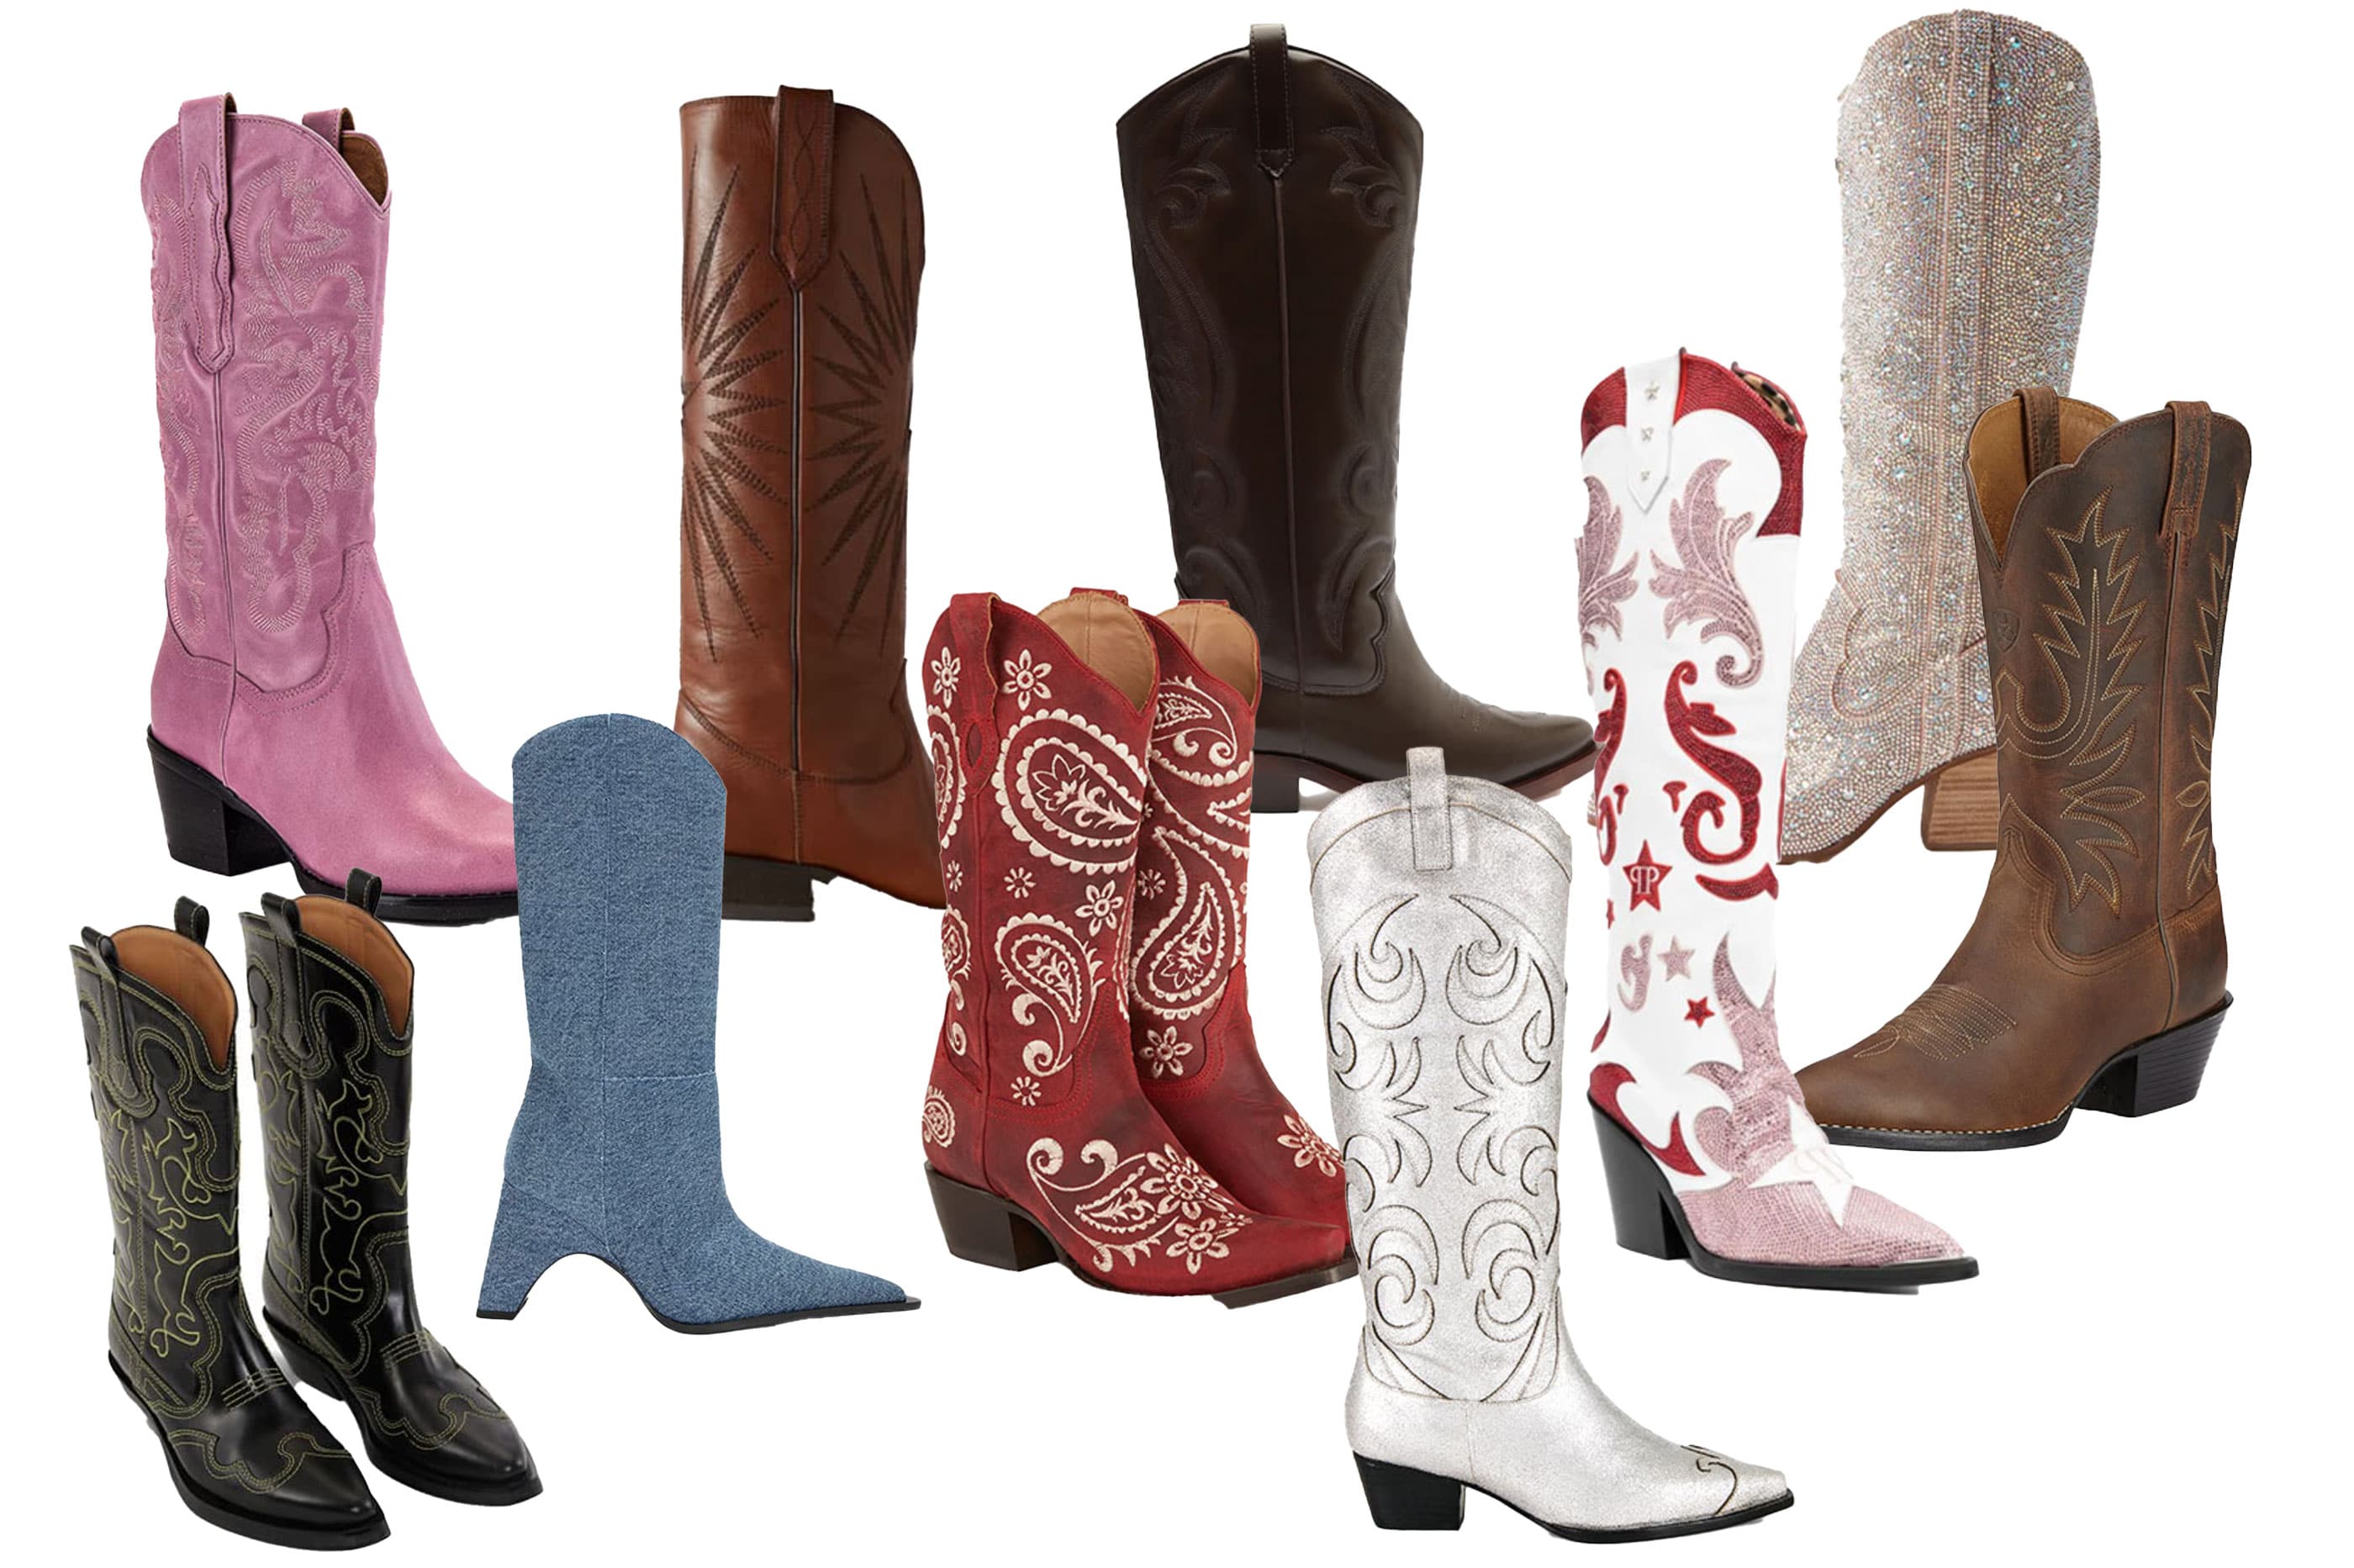 From farm to festival: the best cowboy boots to buy in Australia